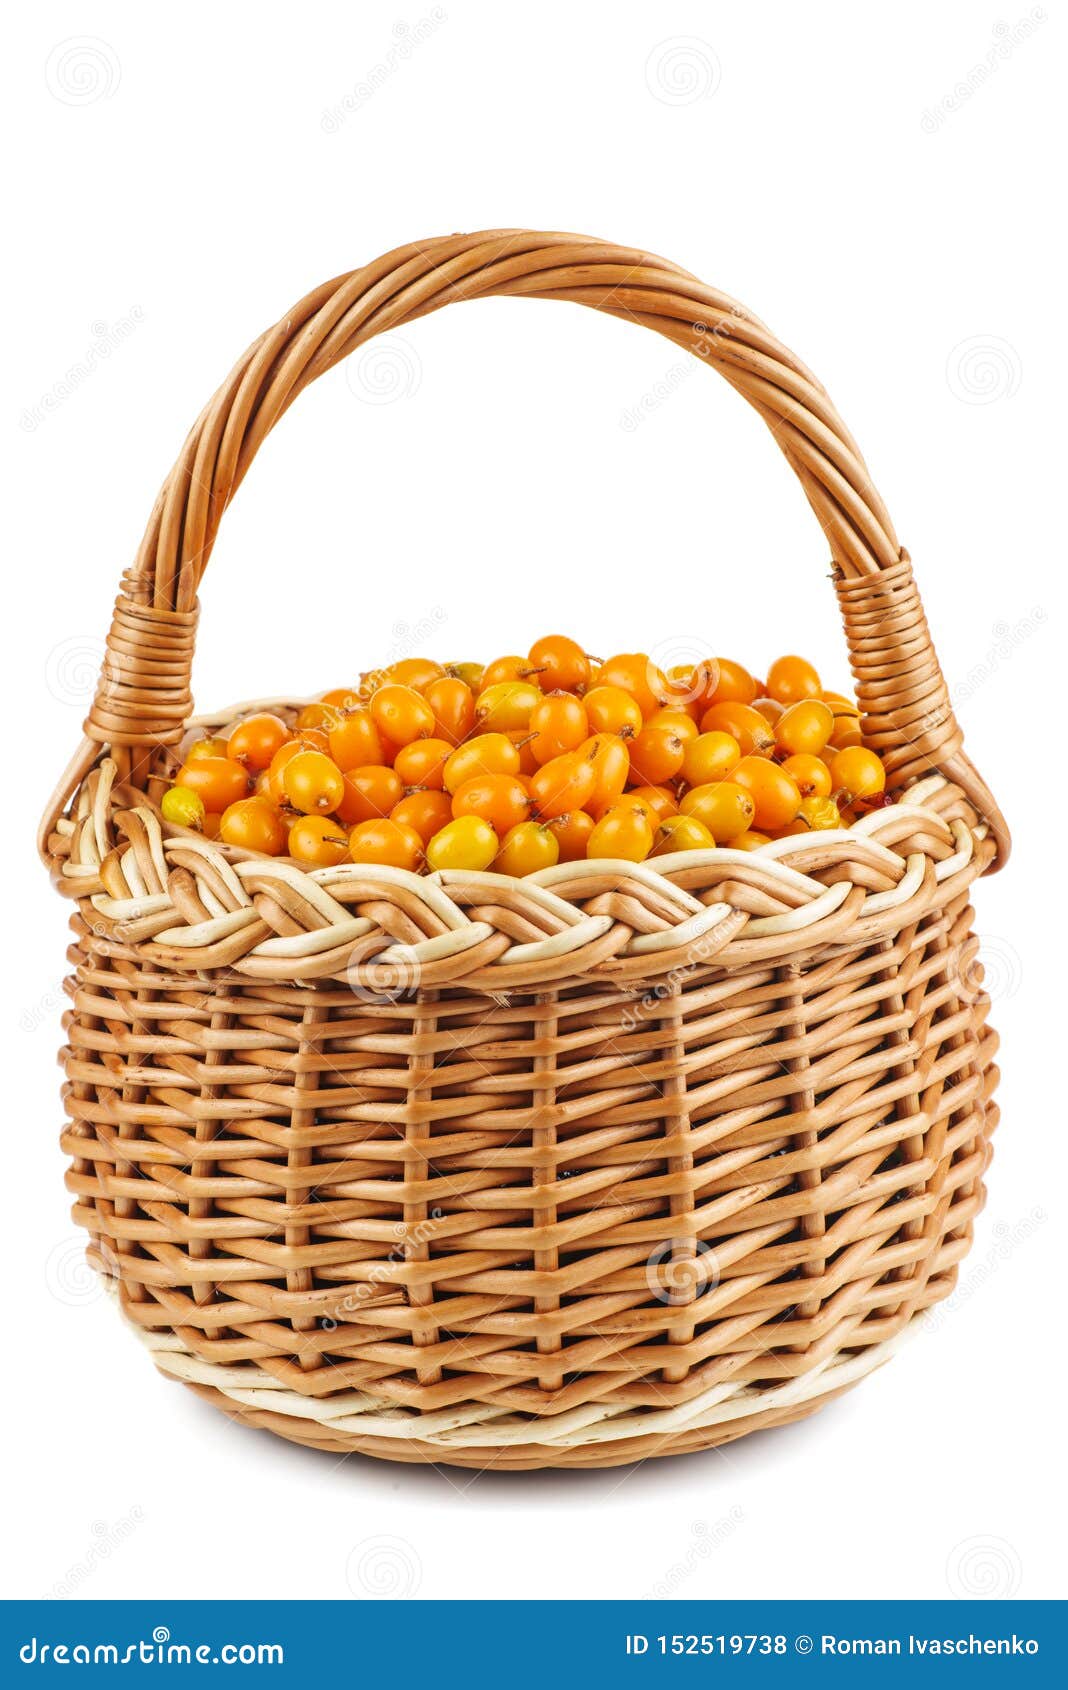 wicker basket with sea buckthorn berries  on white background